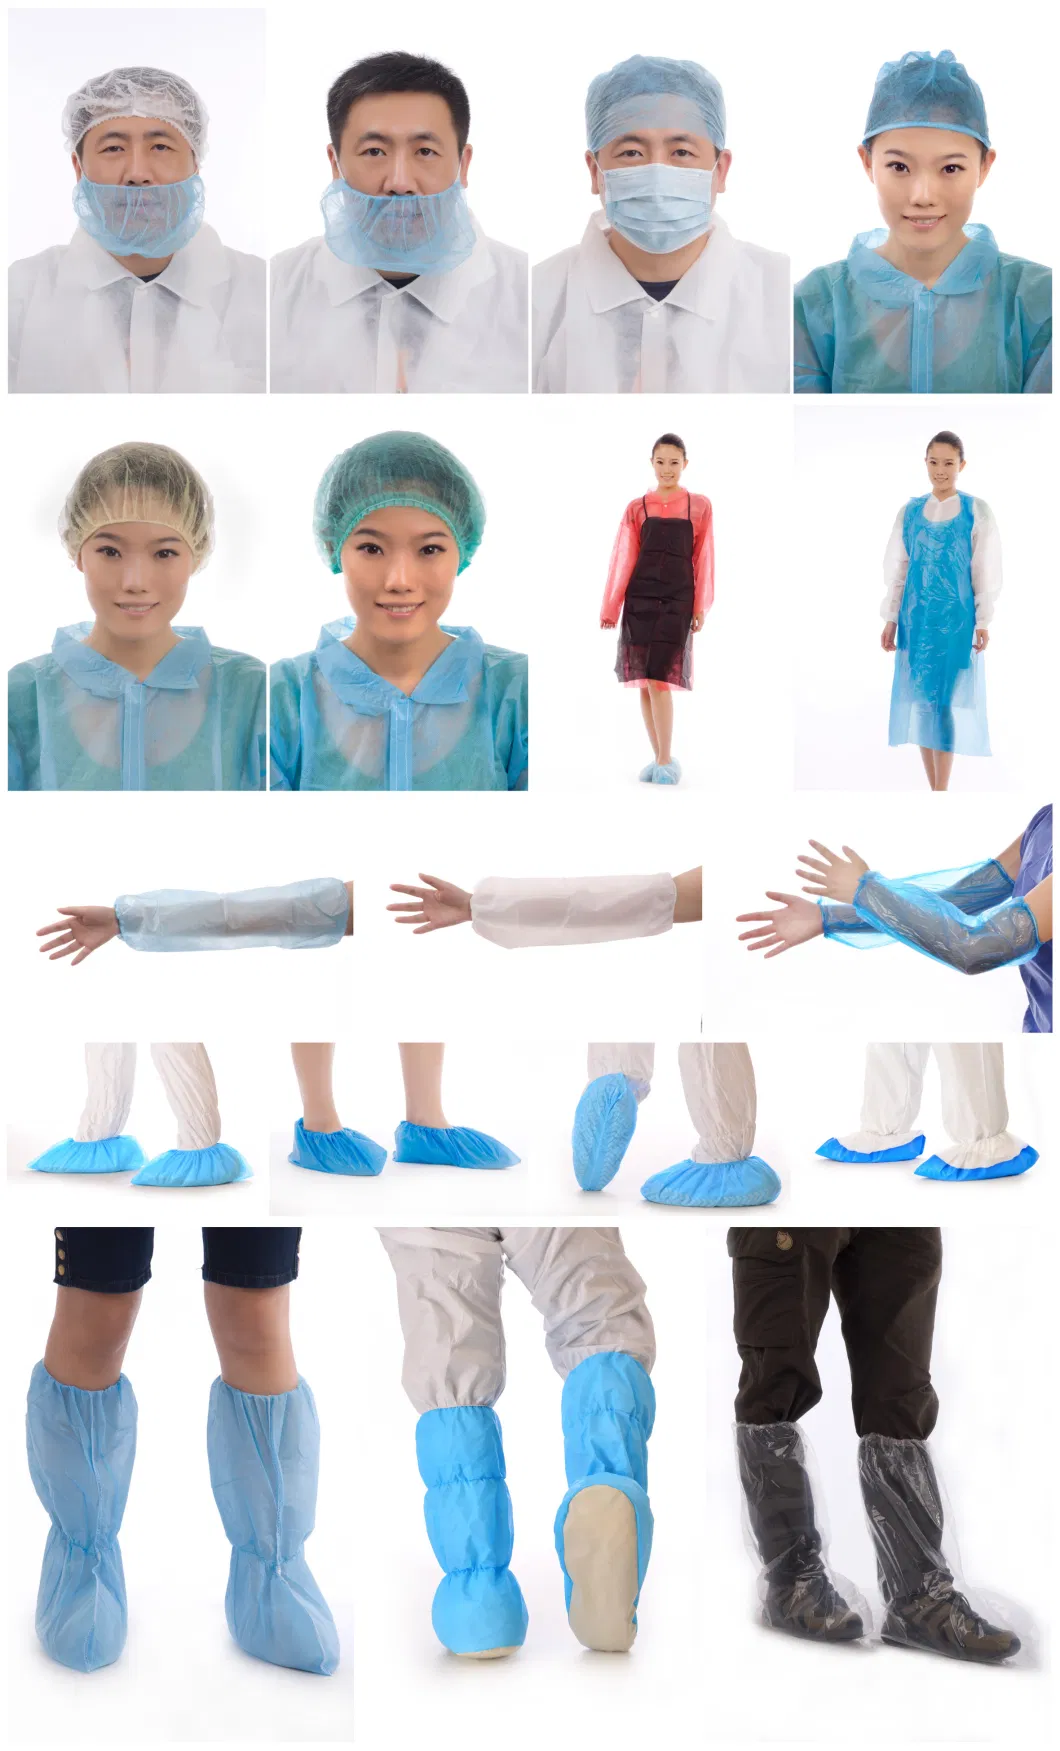 Factory/General Industry Disposable Nonwoven Work Clothes Elastic Cuffs Velcros Closure Lab Coat